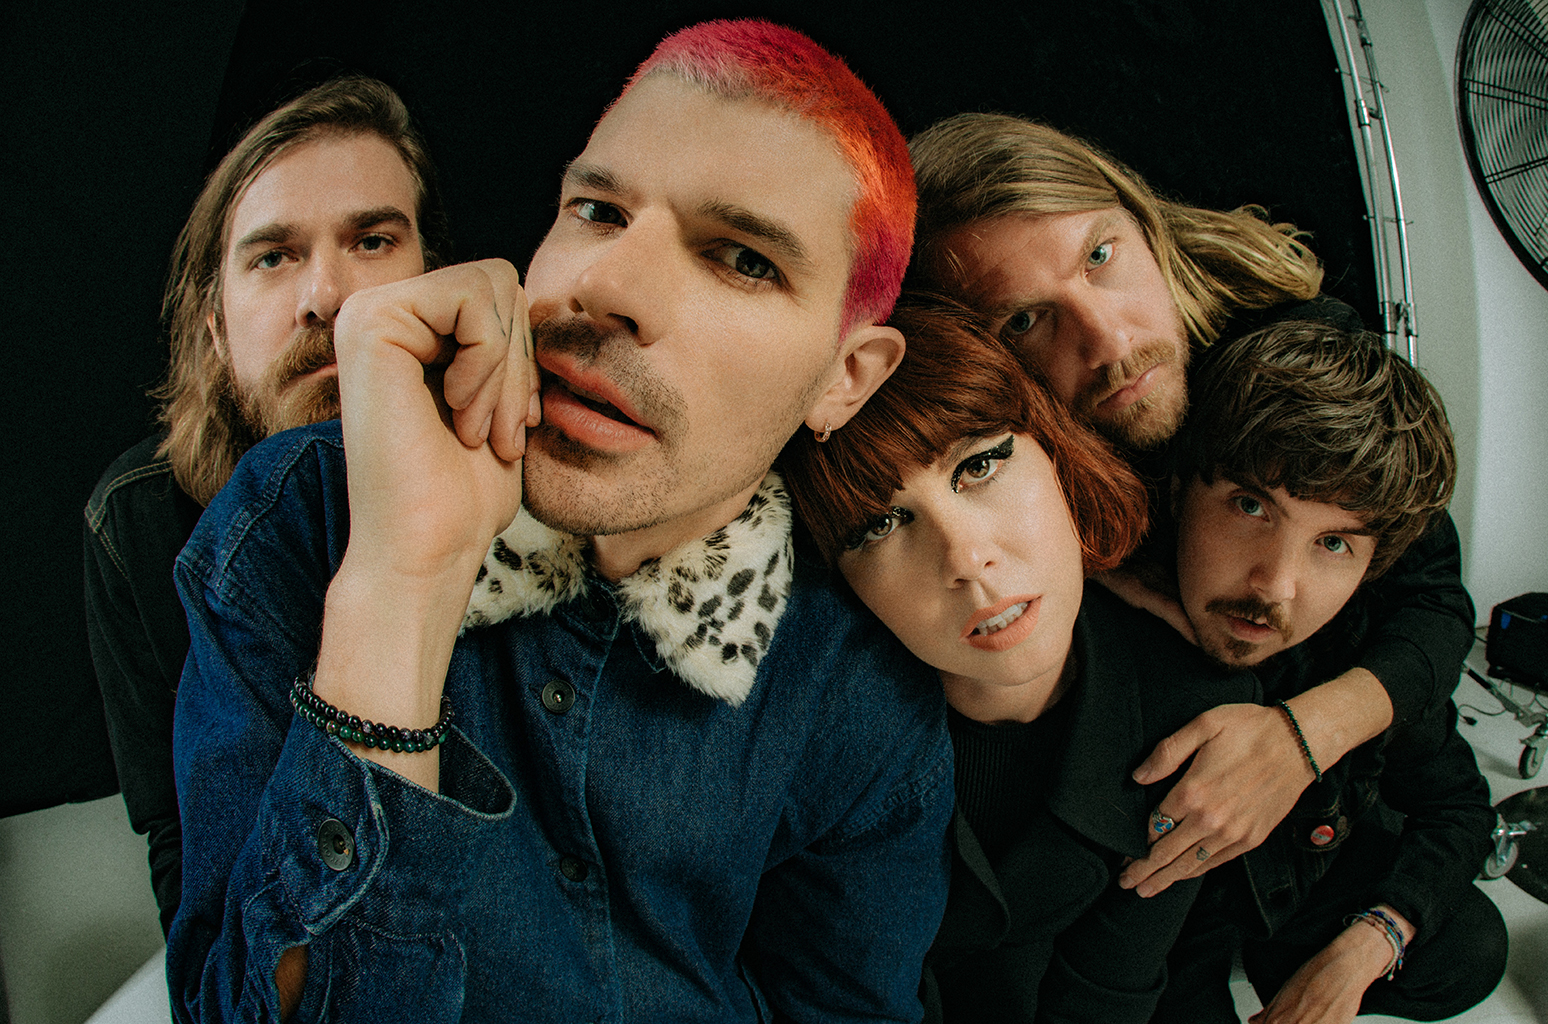 Grouplove Makes Their Much-Anticipated Return With 'Deleter' - www.billboard.com